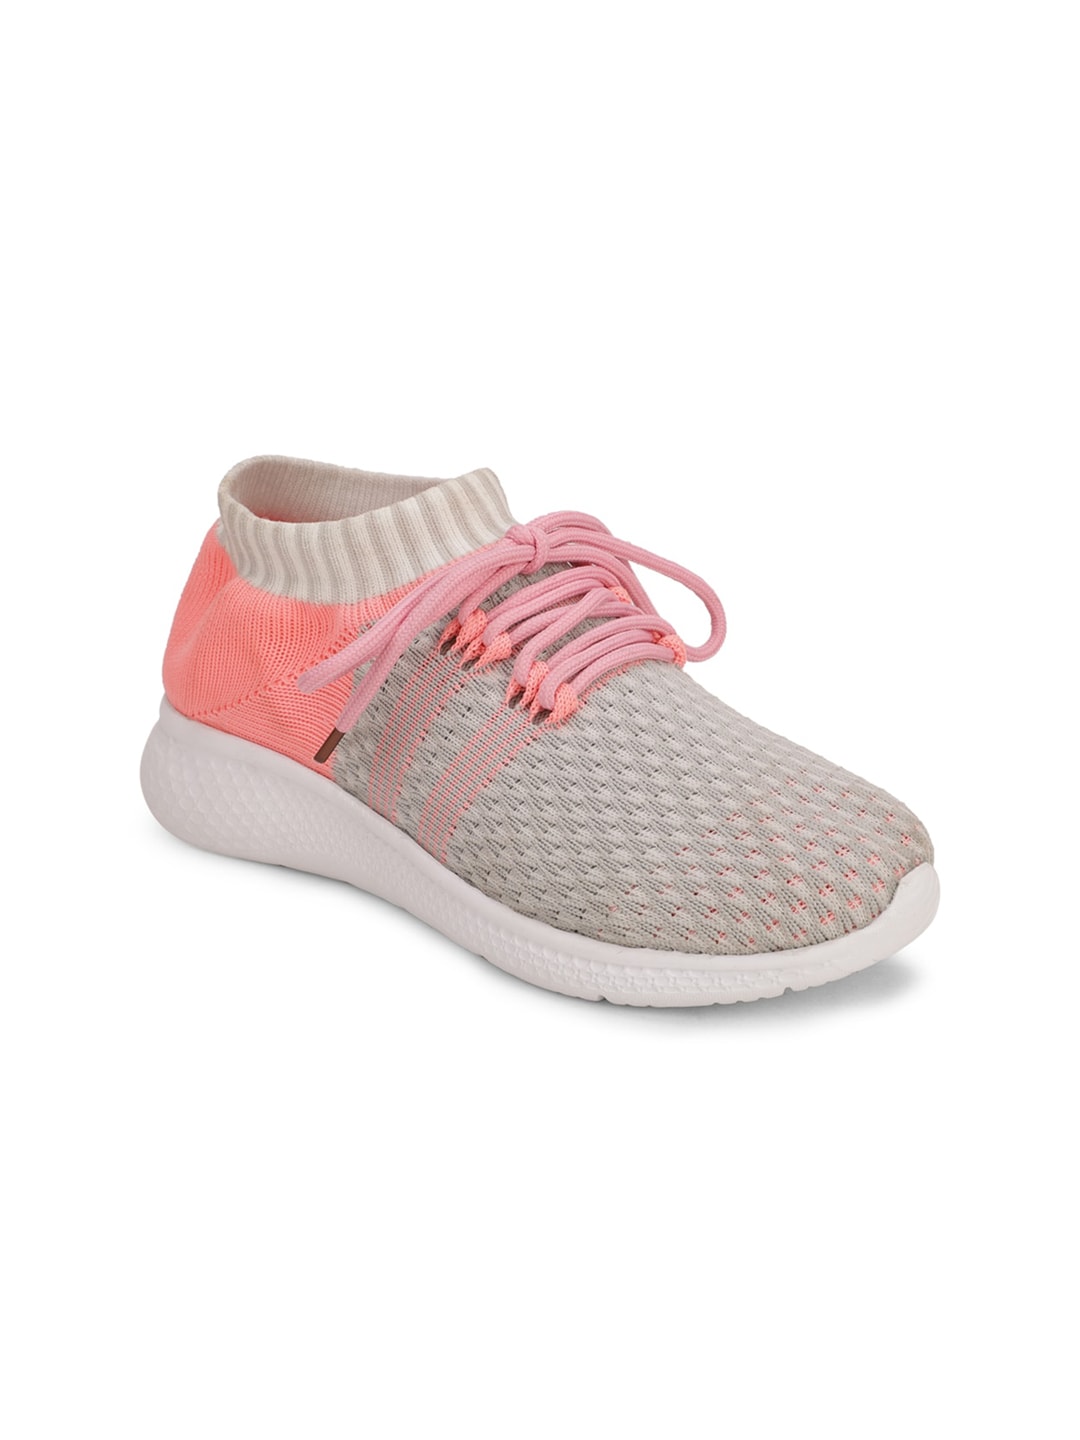 HERE&NOW Women Grey Woven Design Slip-On Sneakers Price in India